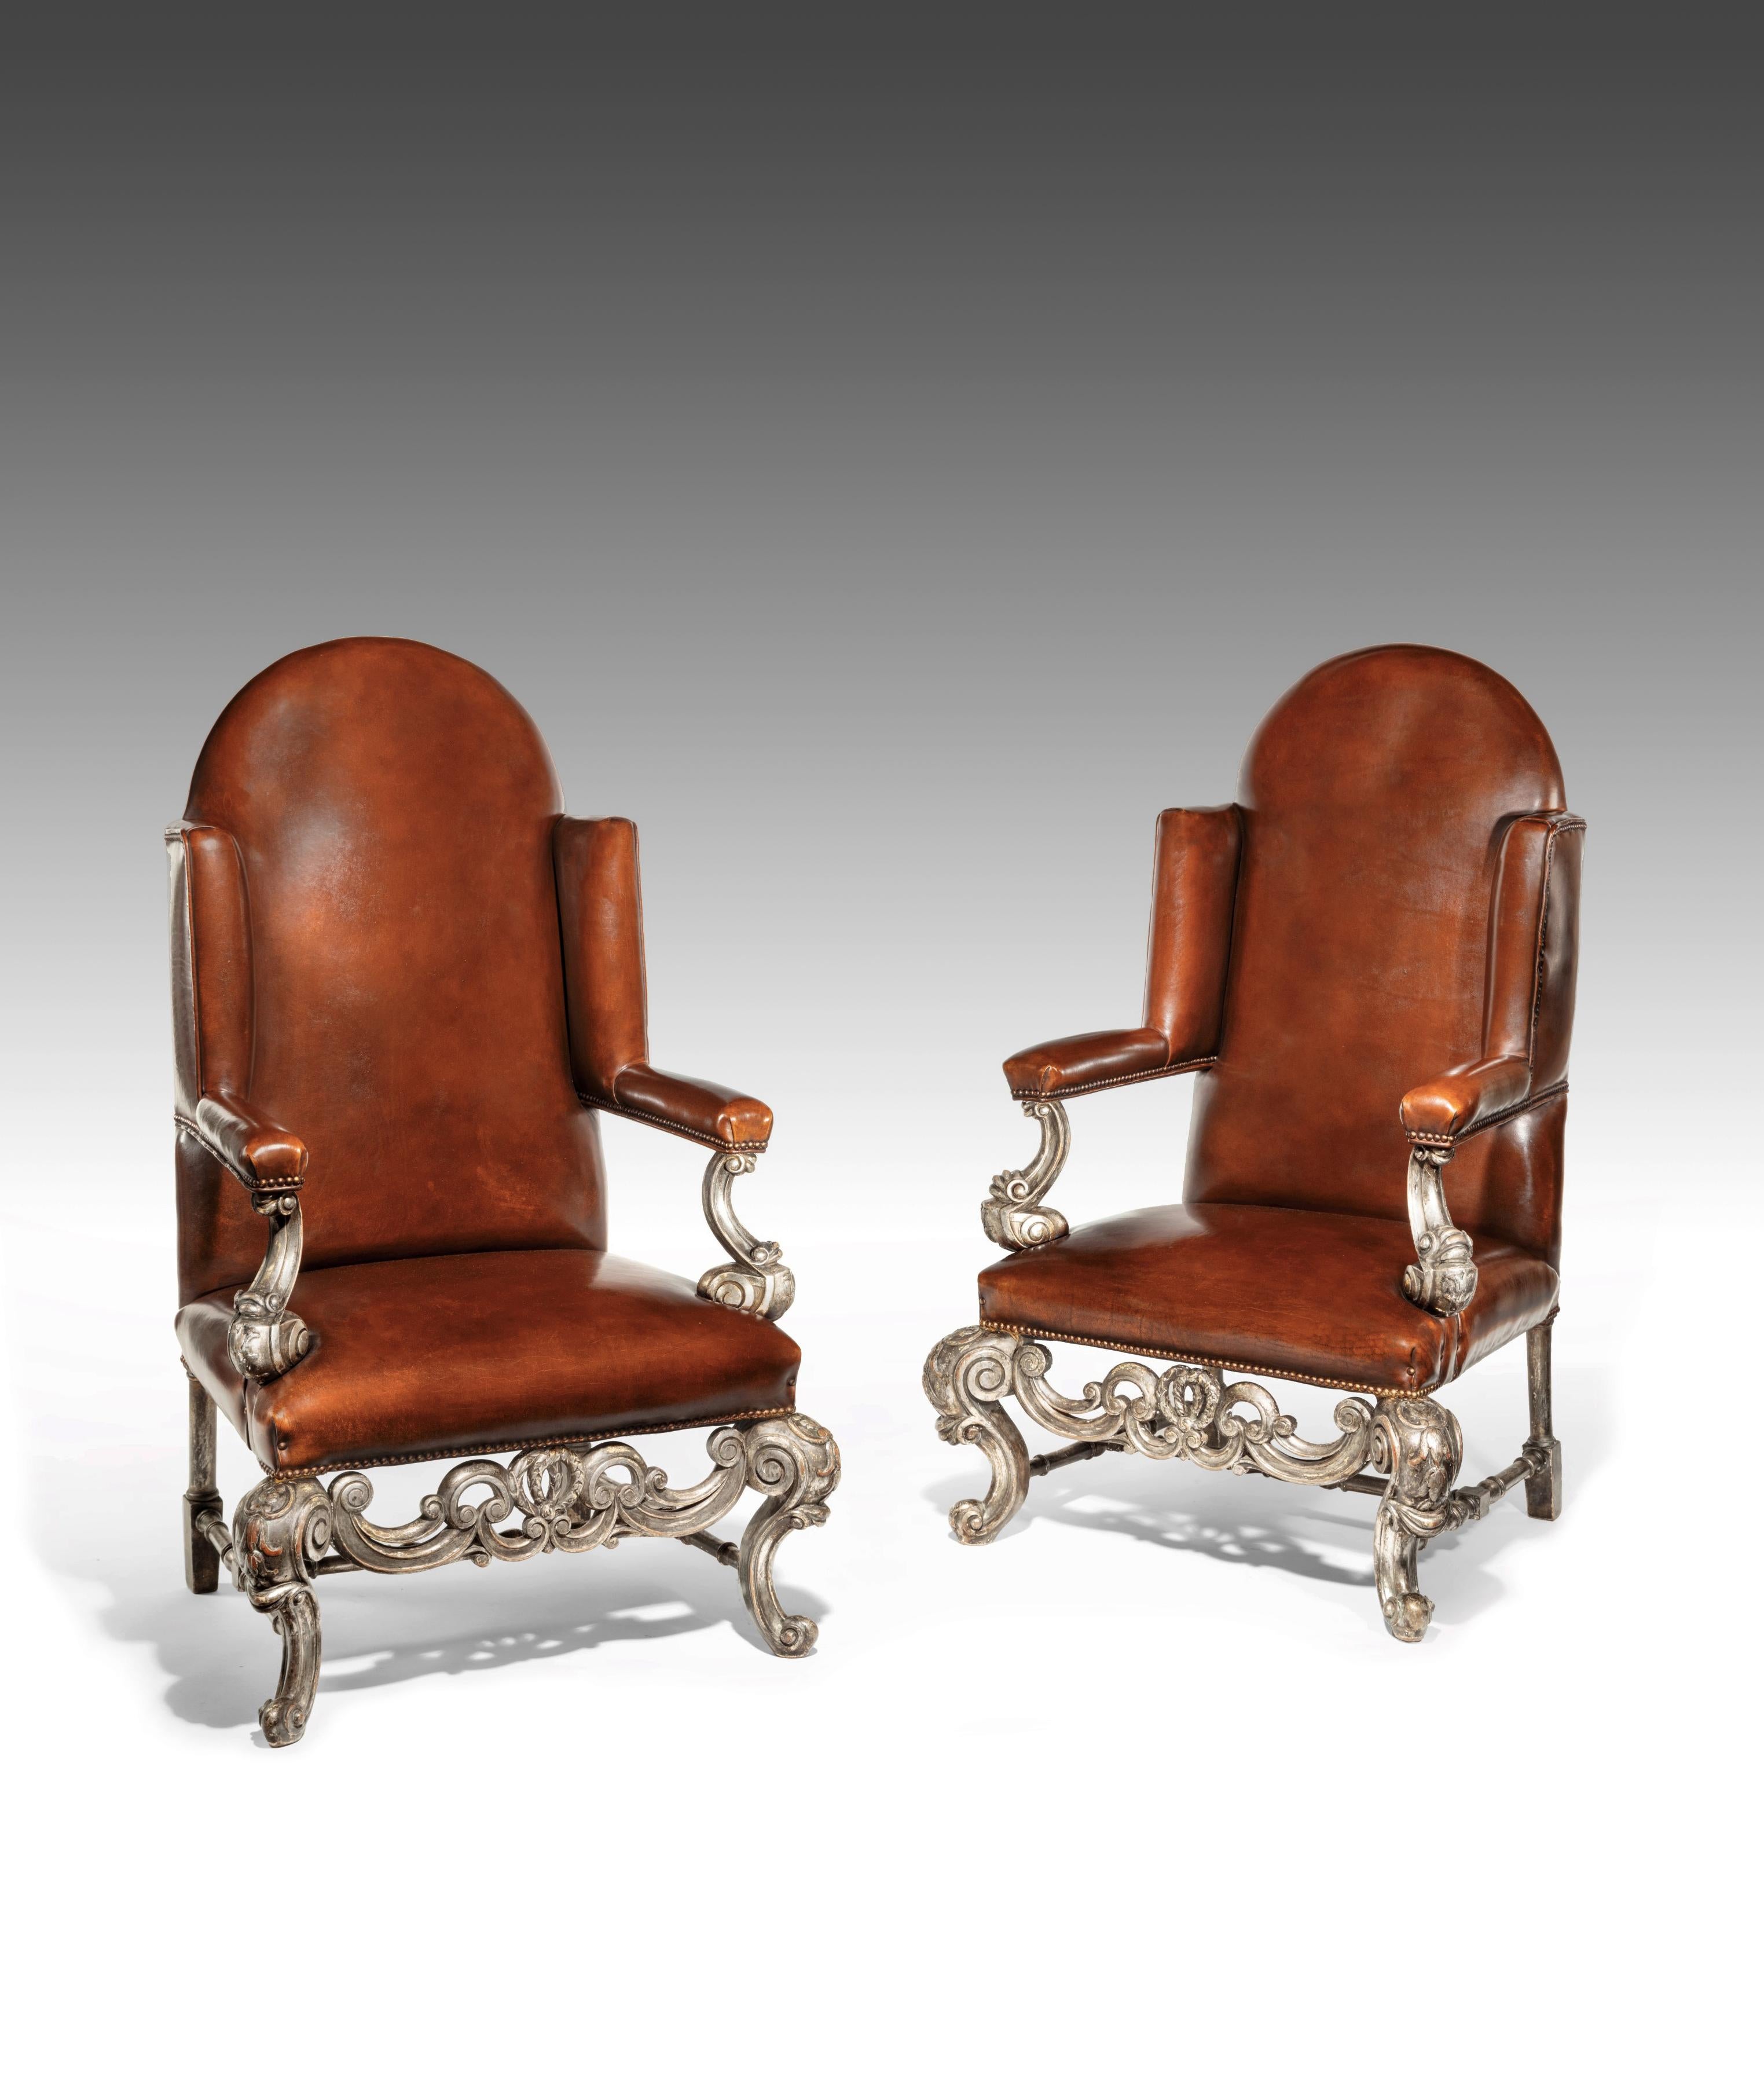 A very unusual and good quality pair of silver gilt leather upholstered wing armchairs dating to circa 1880 -1900.
This decorative and rare pair of leather upholstered wing armchairs have been constructed in the William and Mary style. With domed